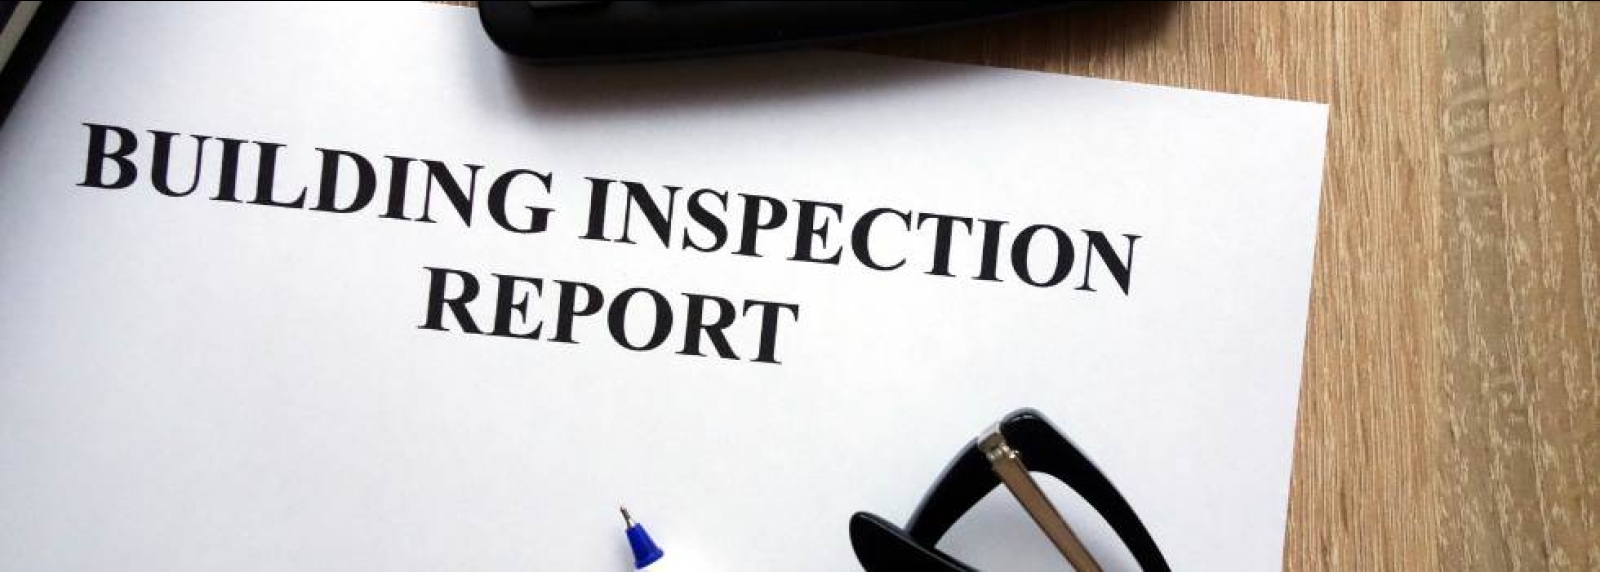 Building Inspection Reports Skinners Shoot